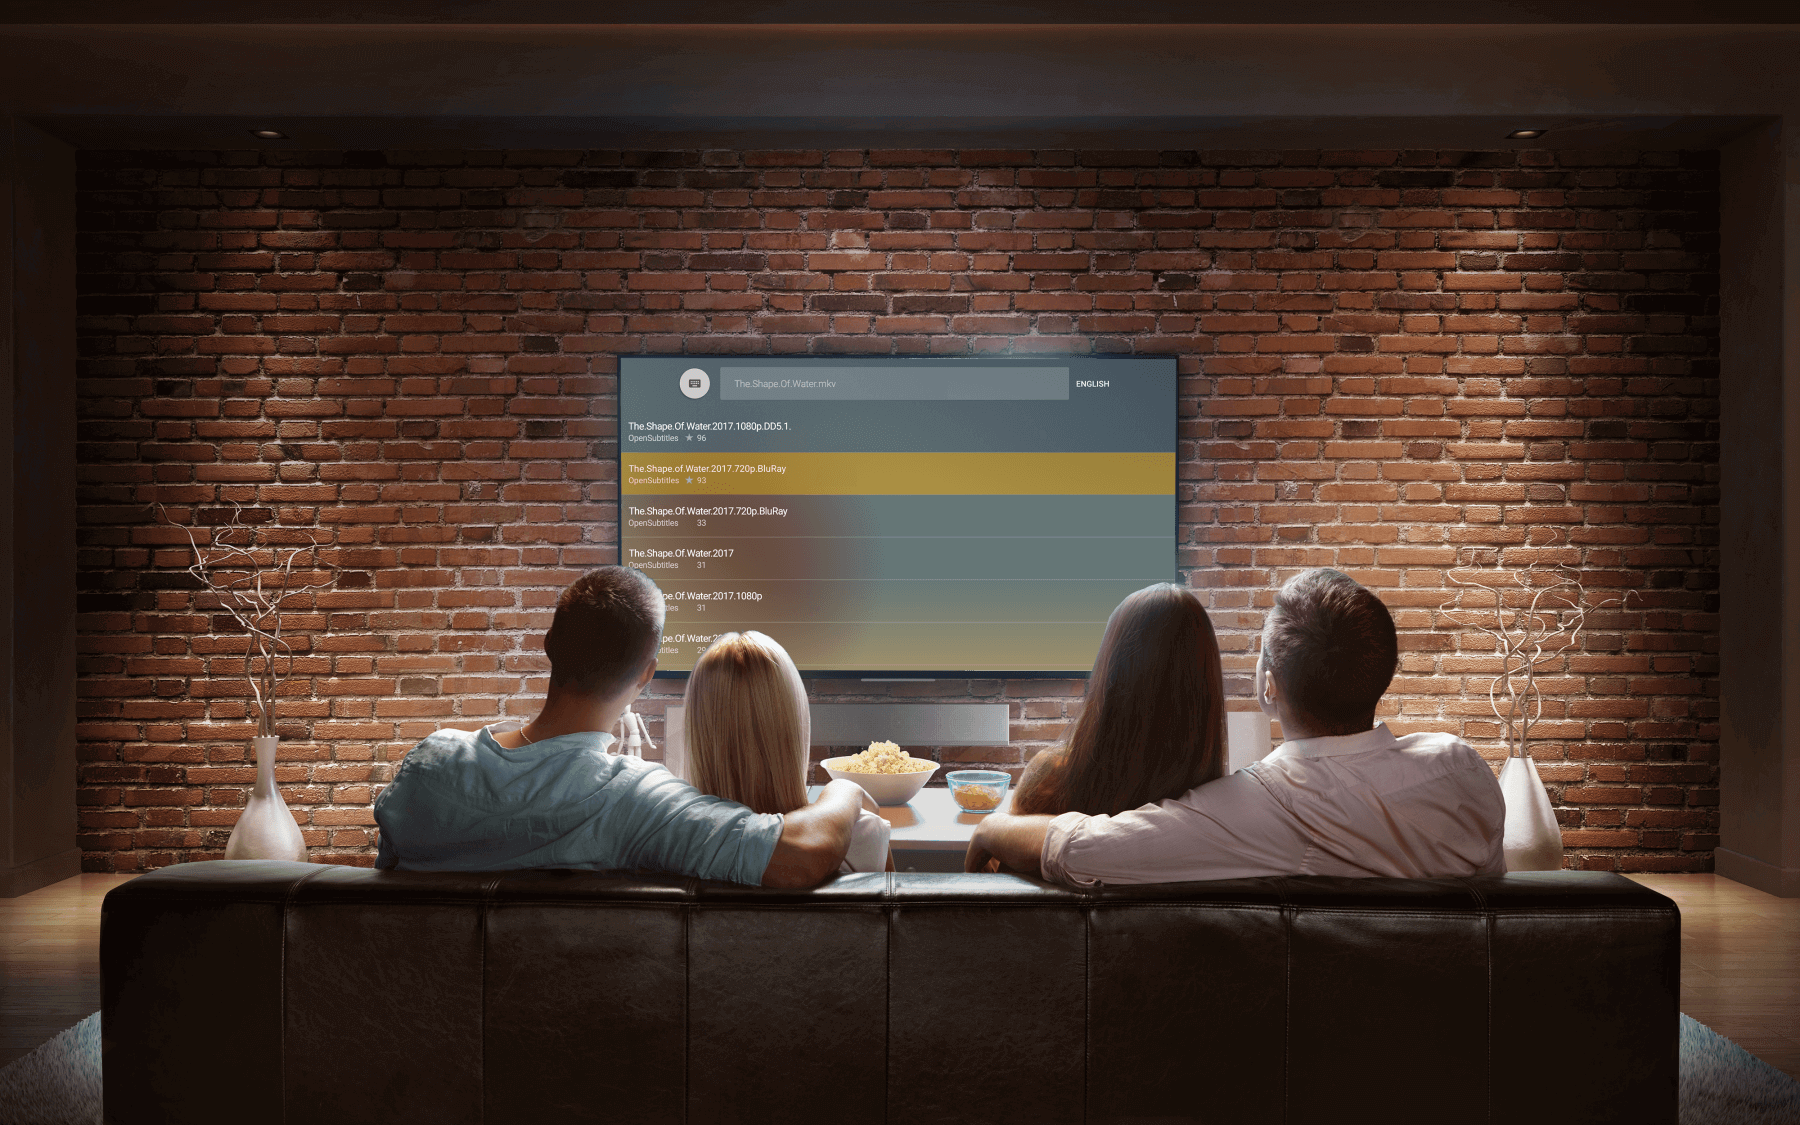 Plex is working to bring in ad-supported movies and revamp subscription options